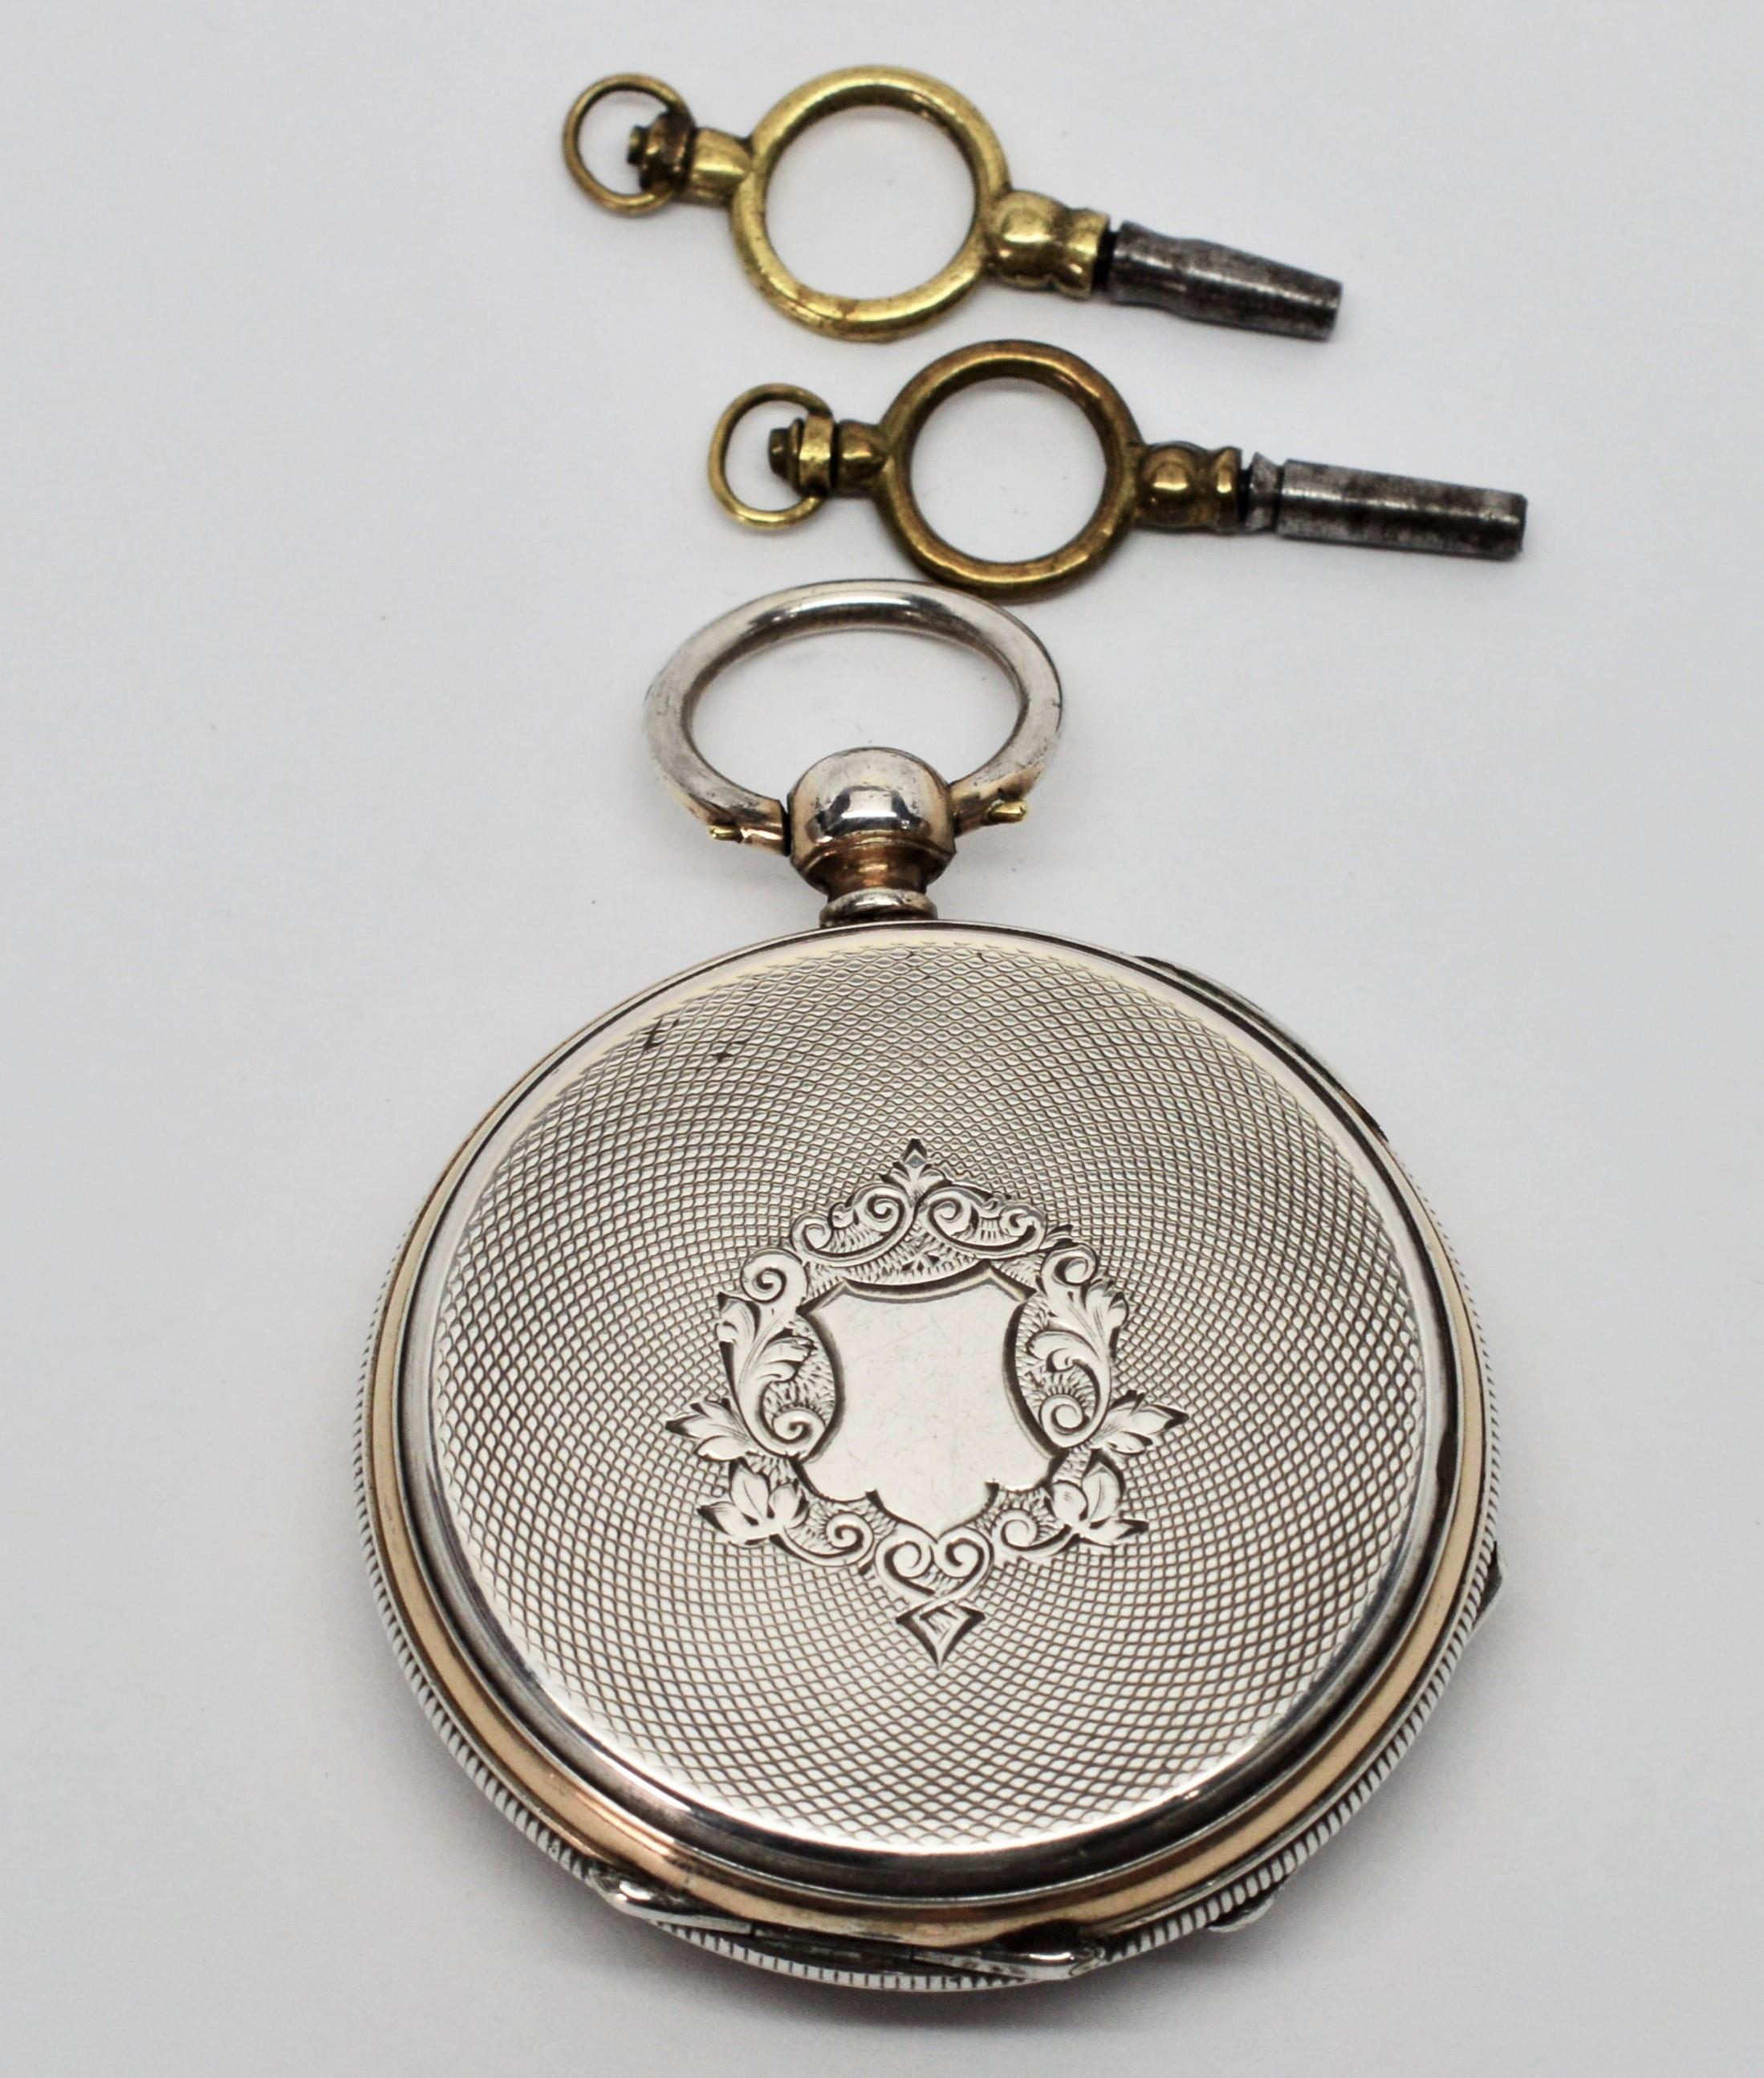 Ancre DePrecision Key Wind Sterling Silver Antique Pocket Watch 4